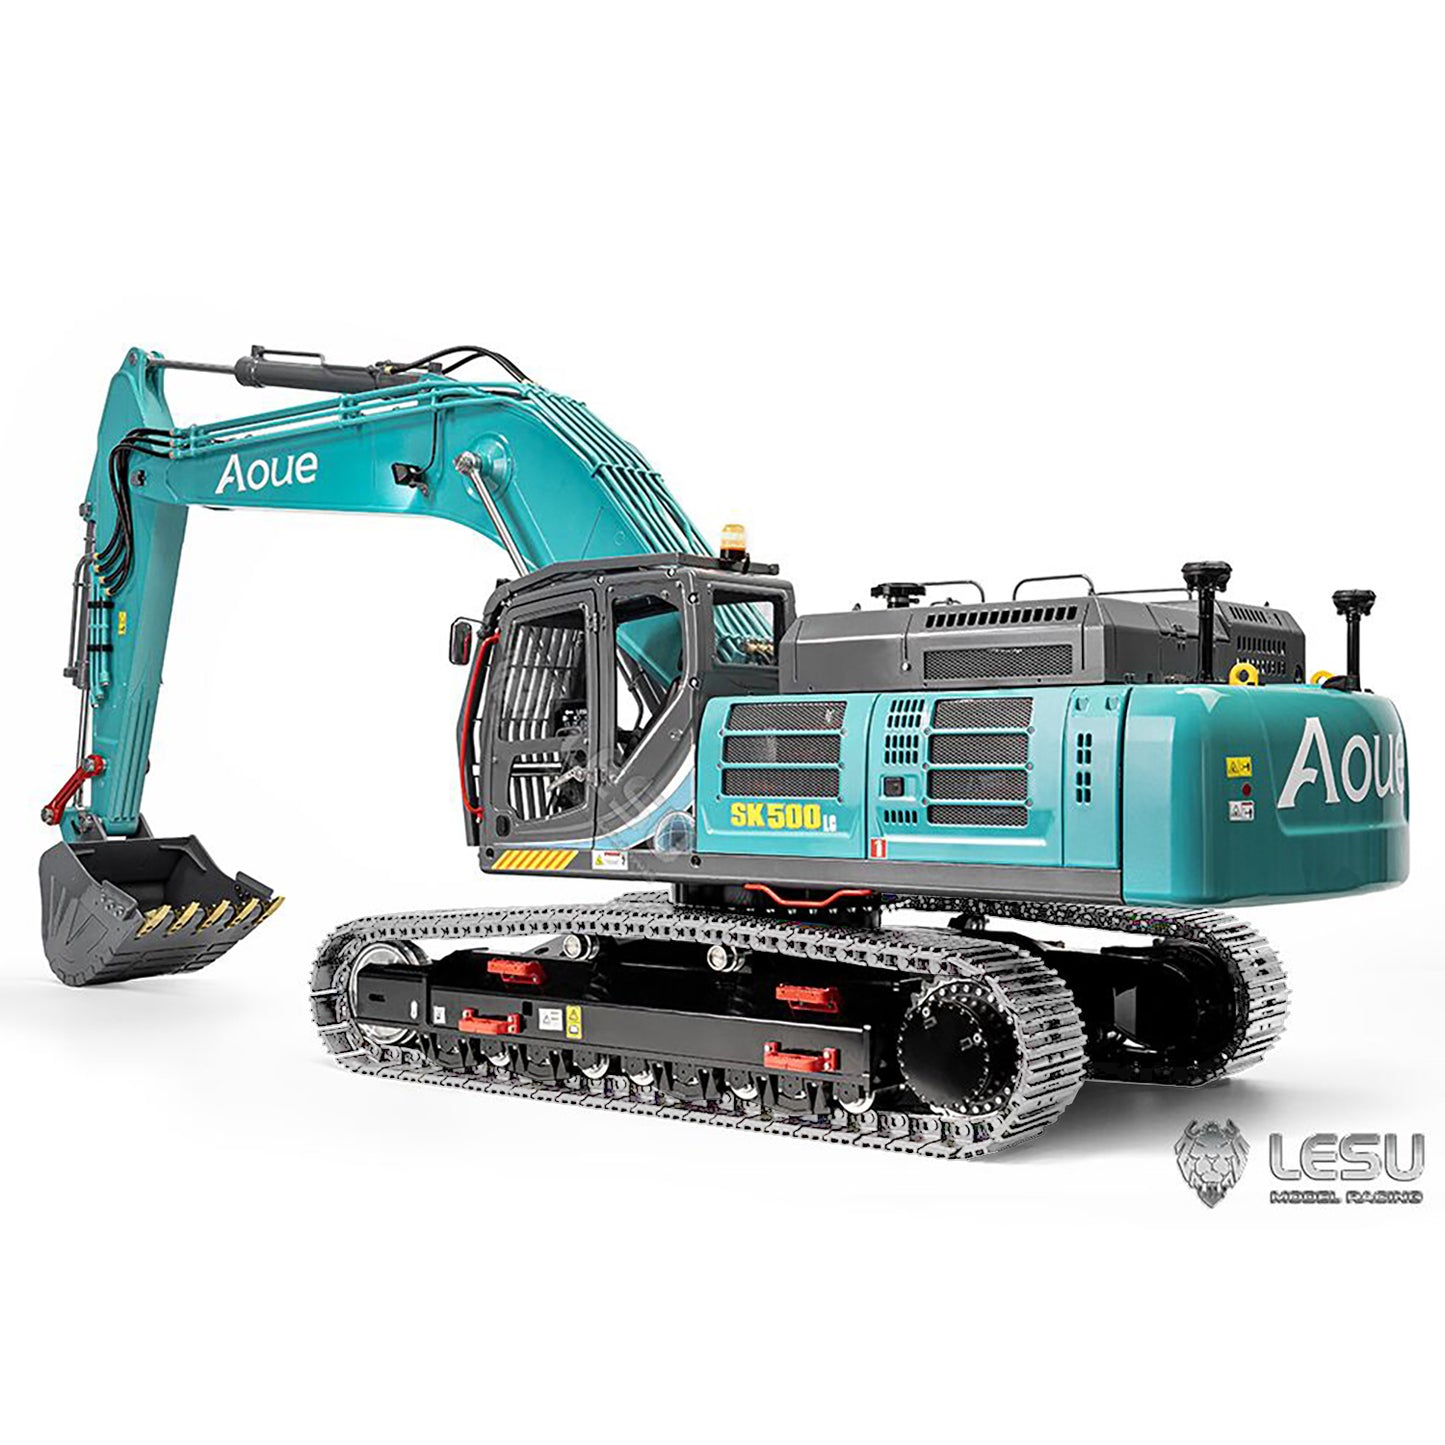 IN STOCK LESU SK500LC 1/14 RC Digger Radio Controlled Hydraulic Excavator Painted Assembled Construction Vehicle Toy Electric Car Model